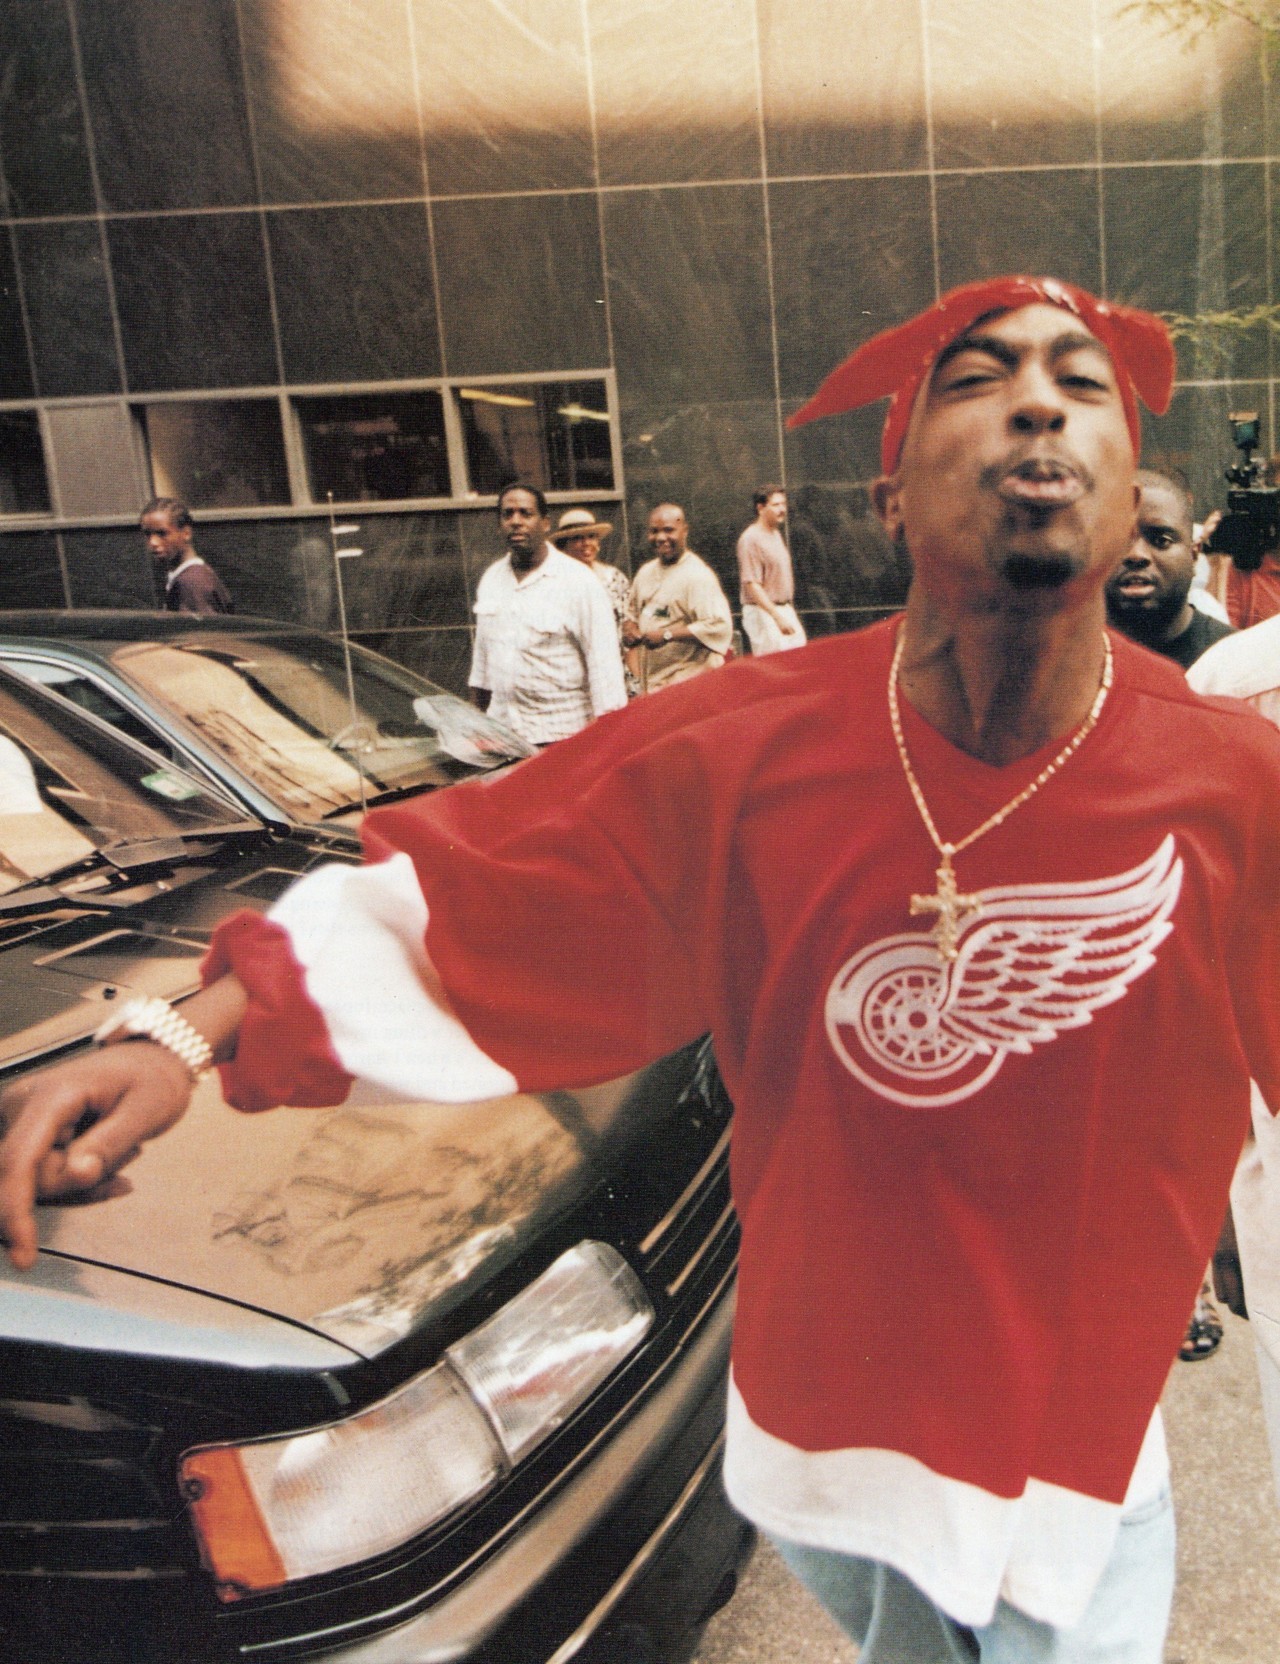 TUPAC Shakur in his Detroit Red Wings jersey, spitting at the